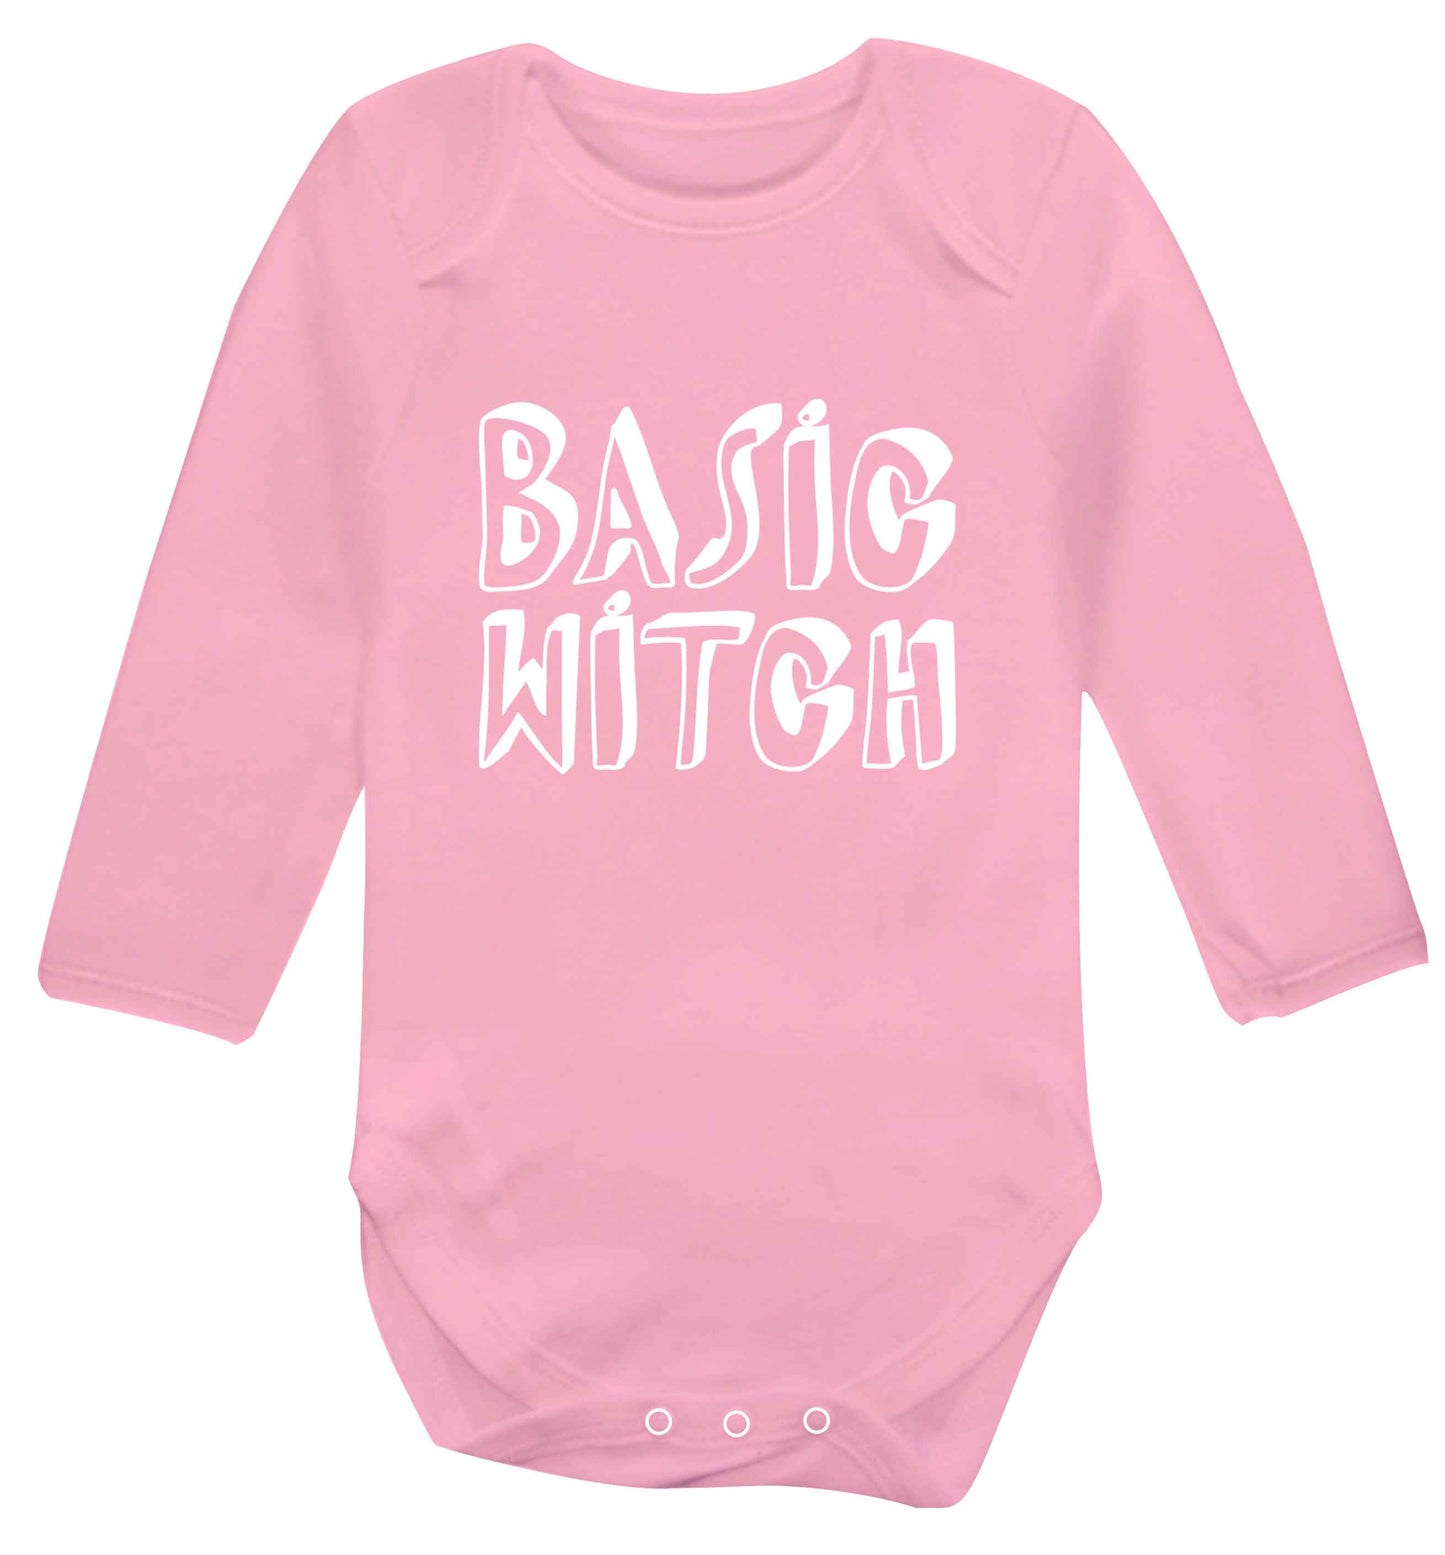 Basic witch baby vest long sleeved pale pink 6-12 months